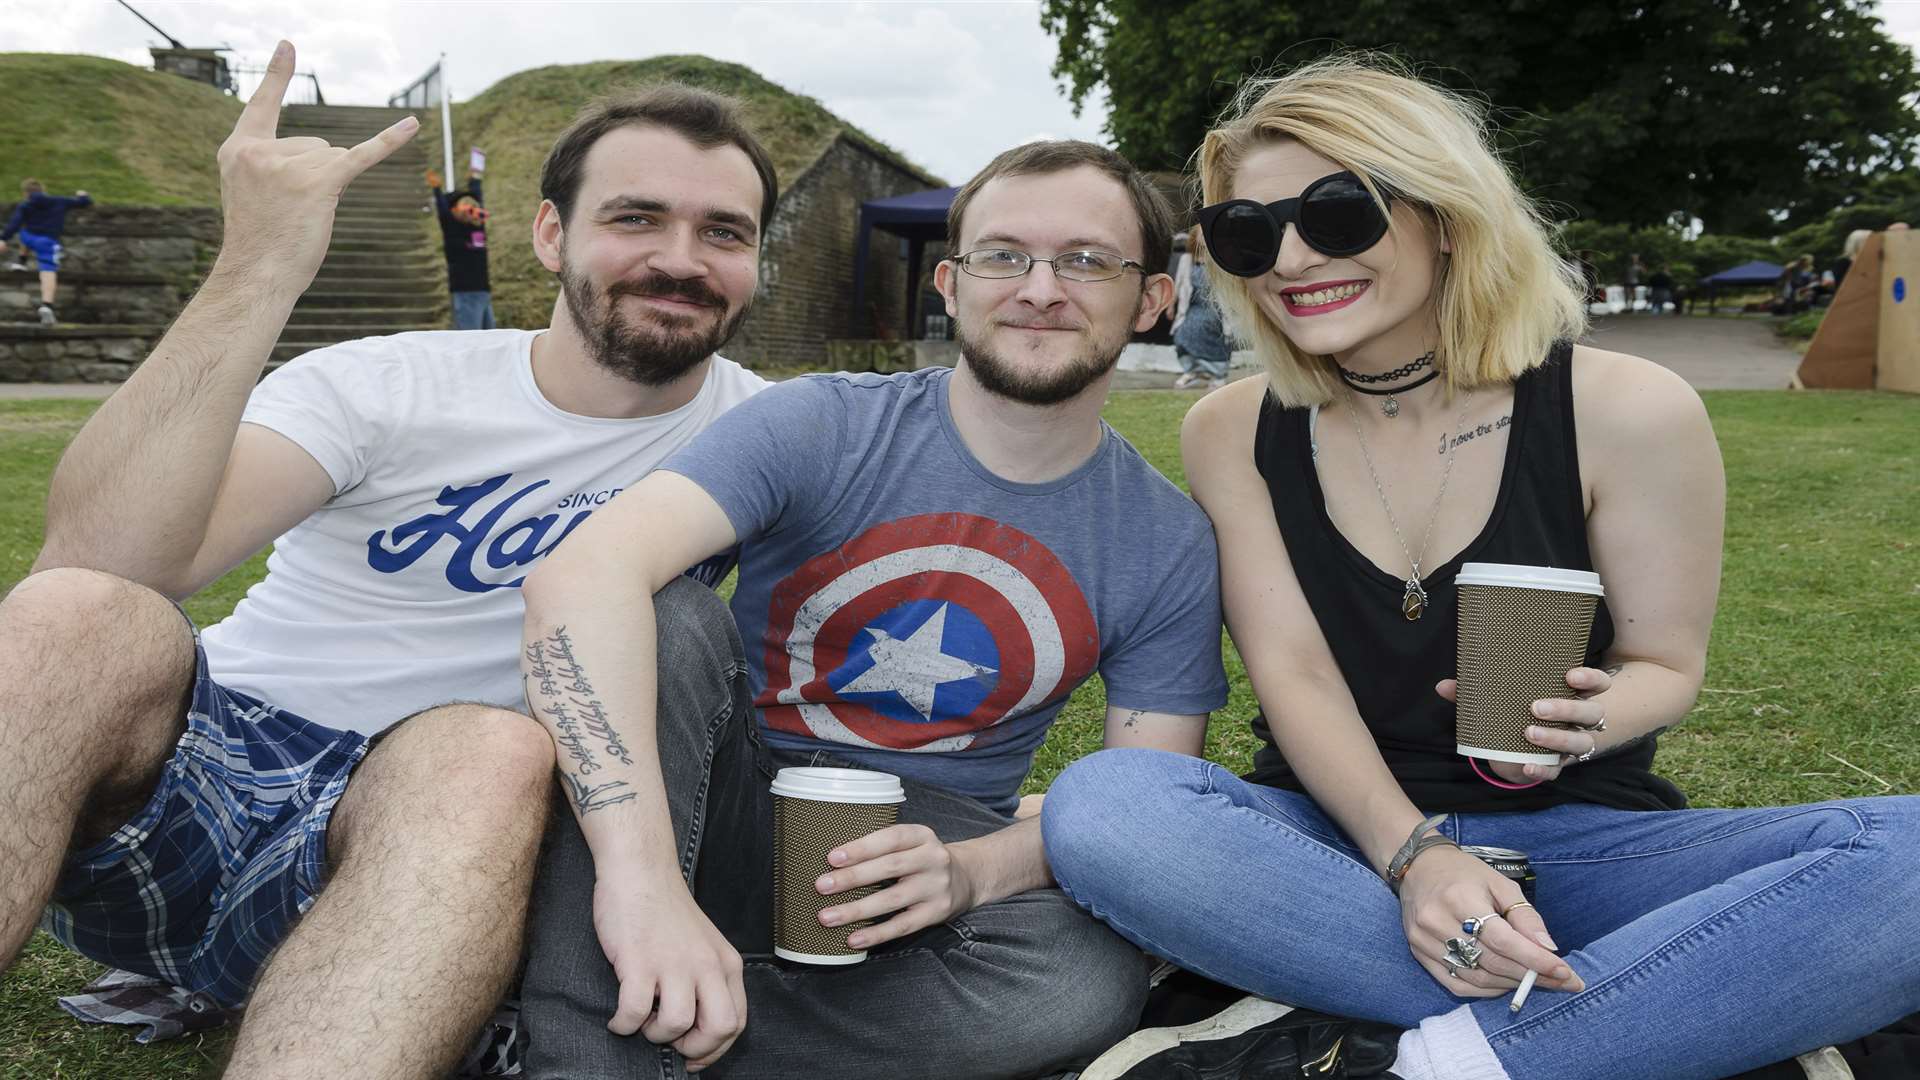 From left, Denver White, Adam James, and Amber Fox enjoy the festival. Picture: Andy Payton